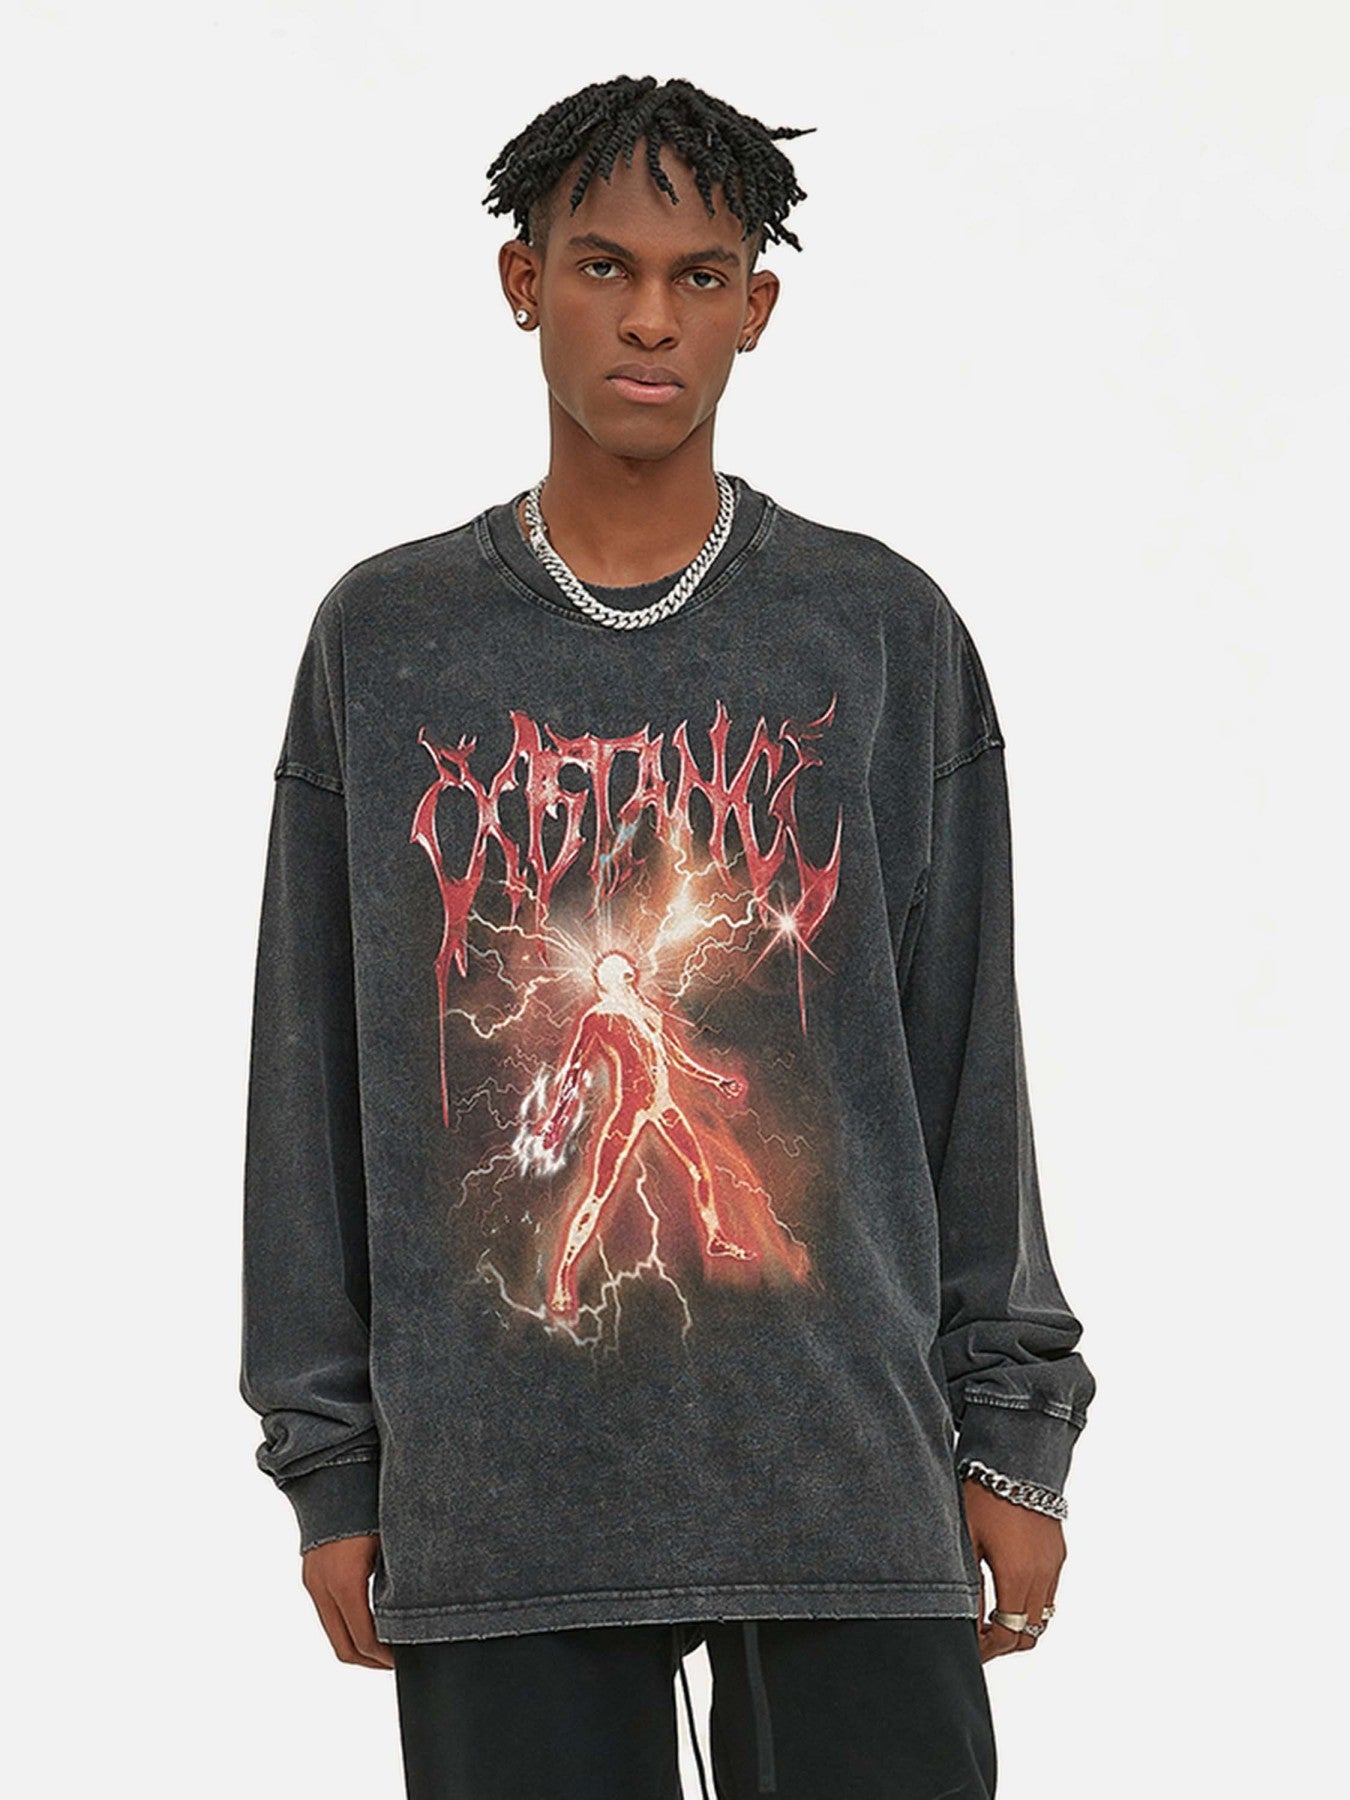 The Supermade Flame Patterned Aged Washed Crew Neck Sweatshirt